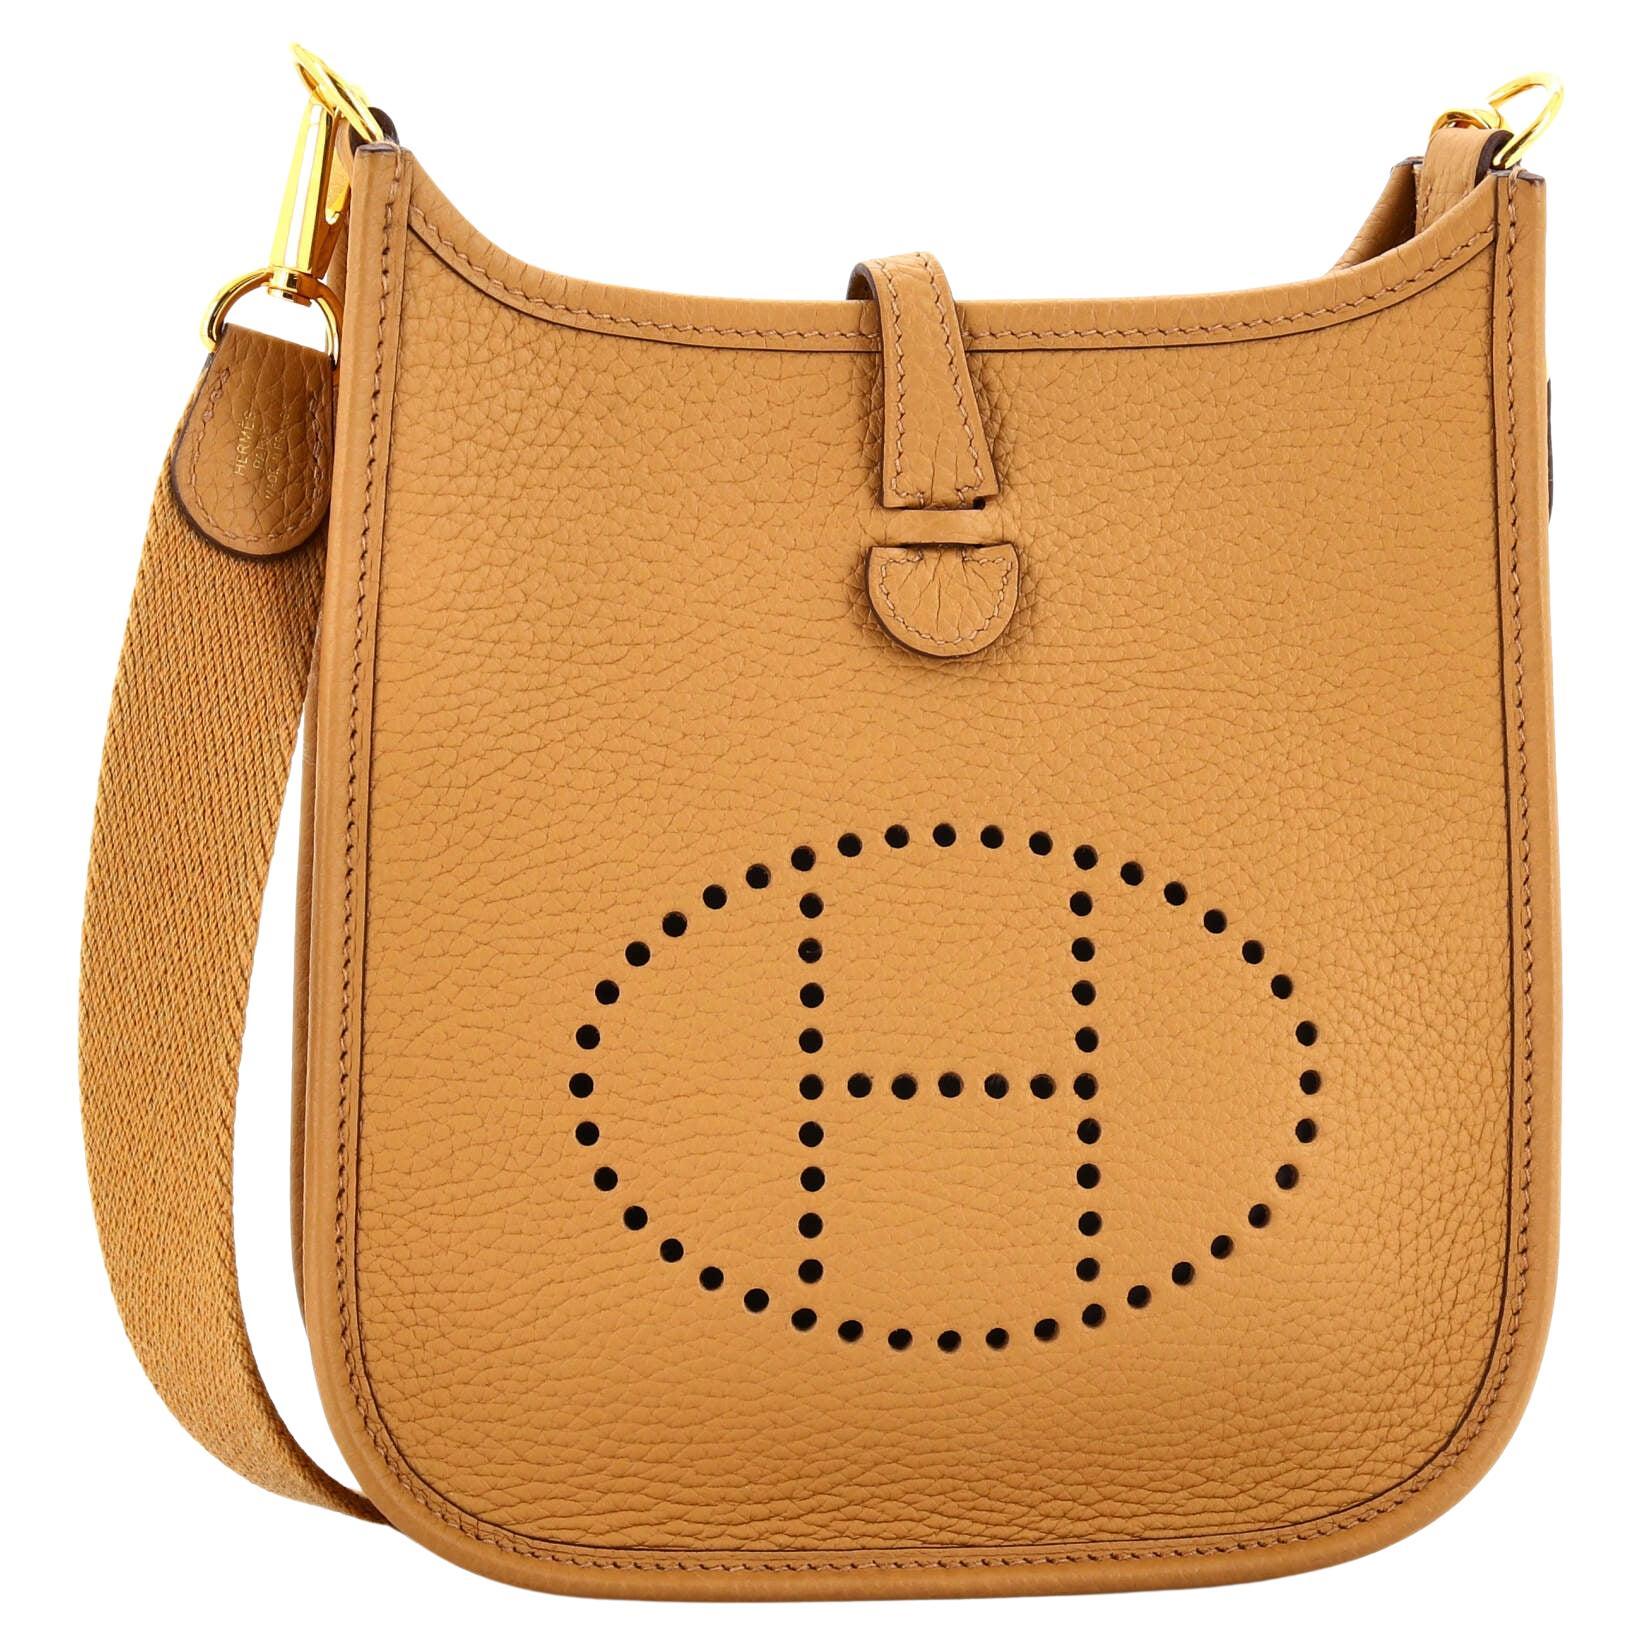 Hermes Crossbody Bag - The Epitome of Elegance and Convenience